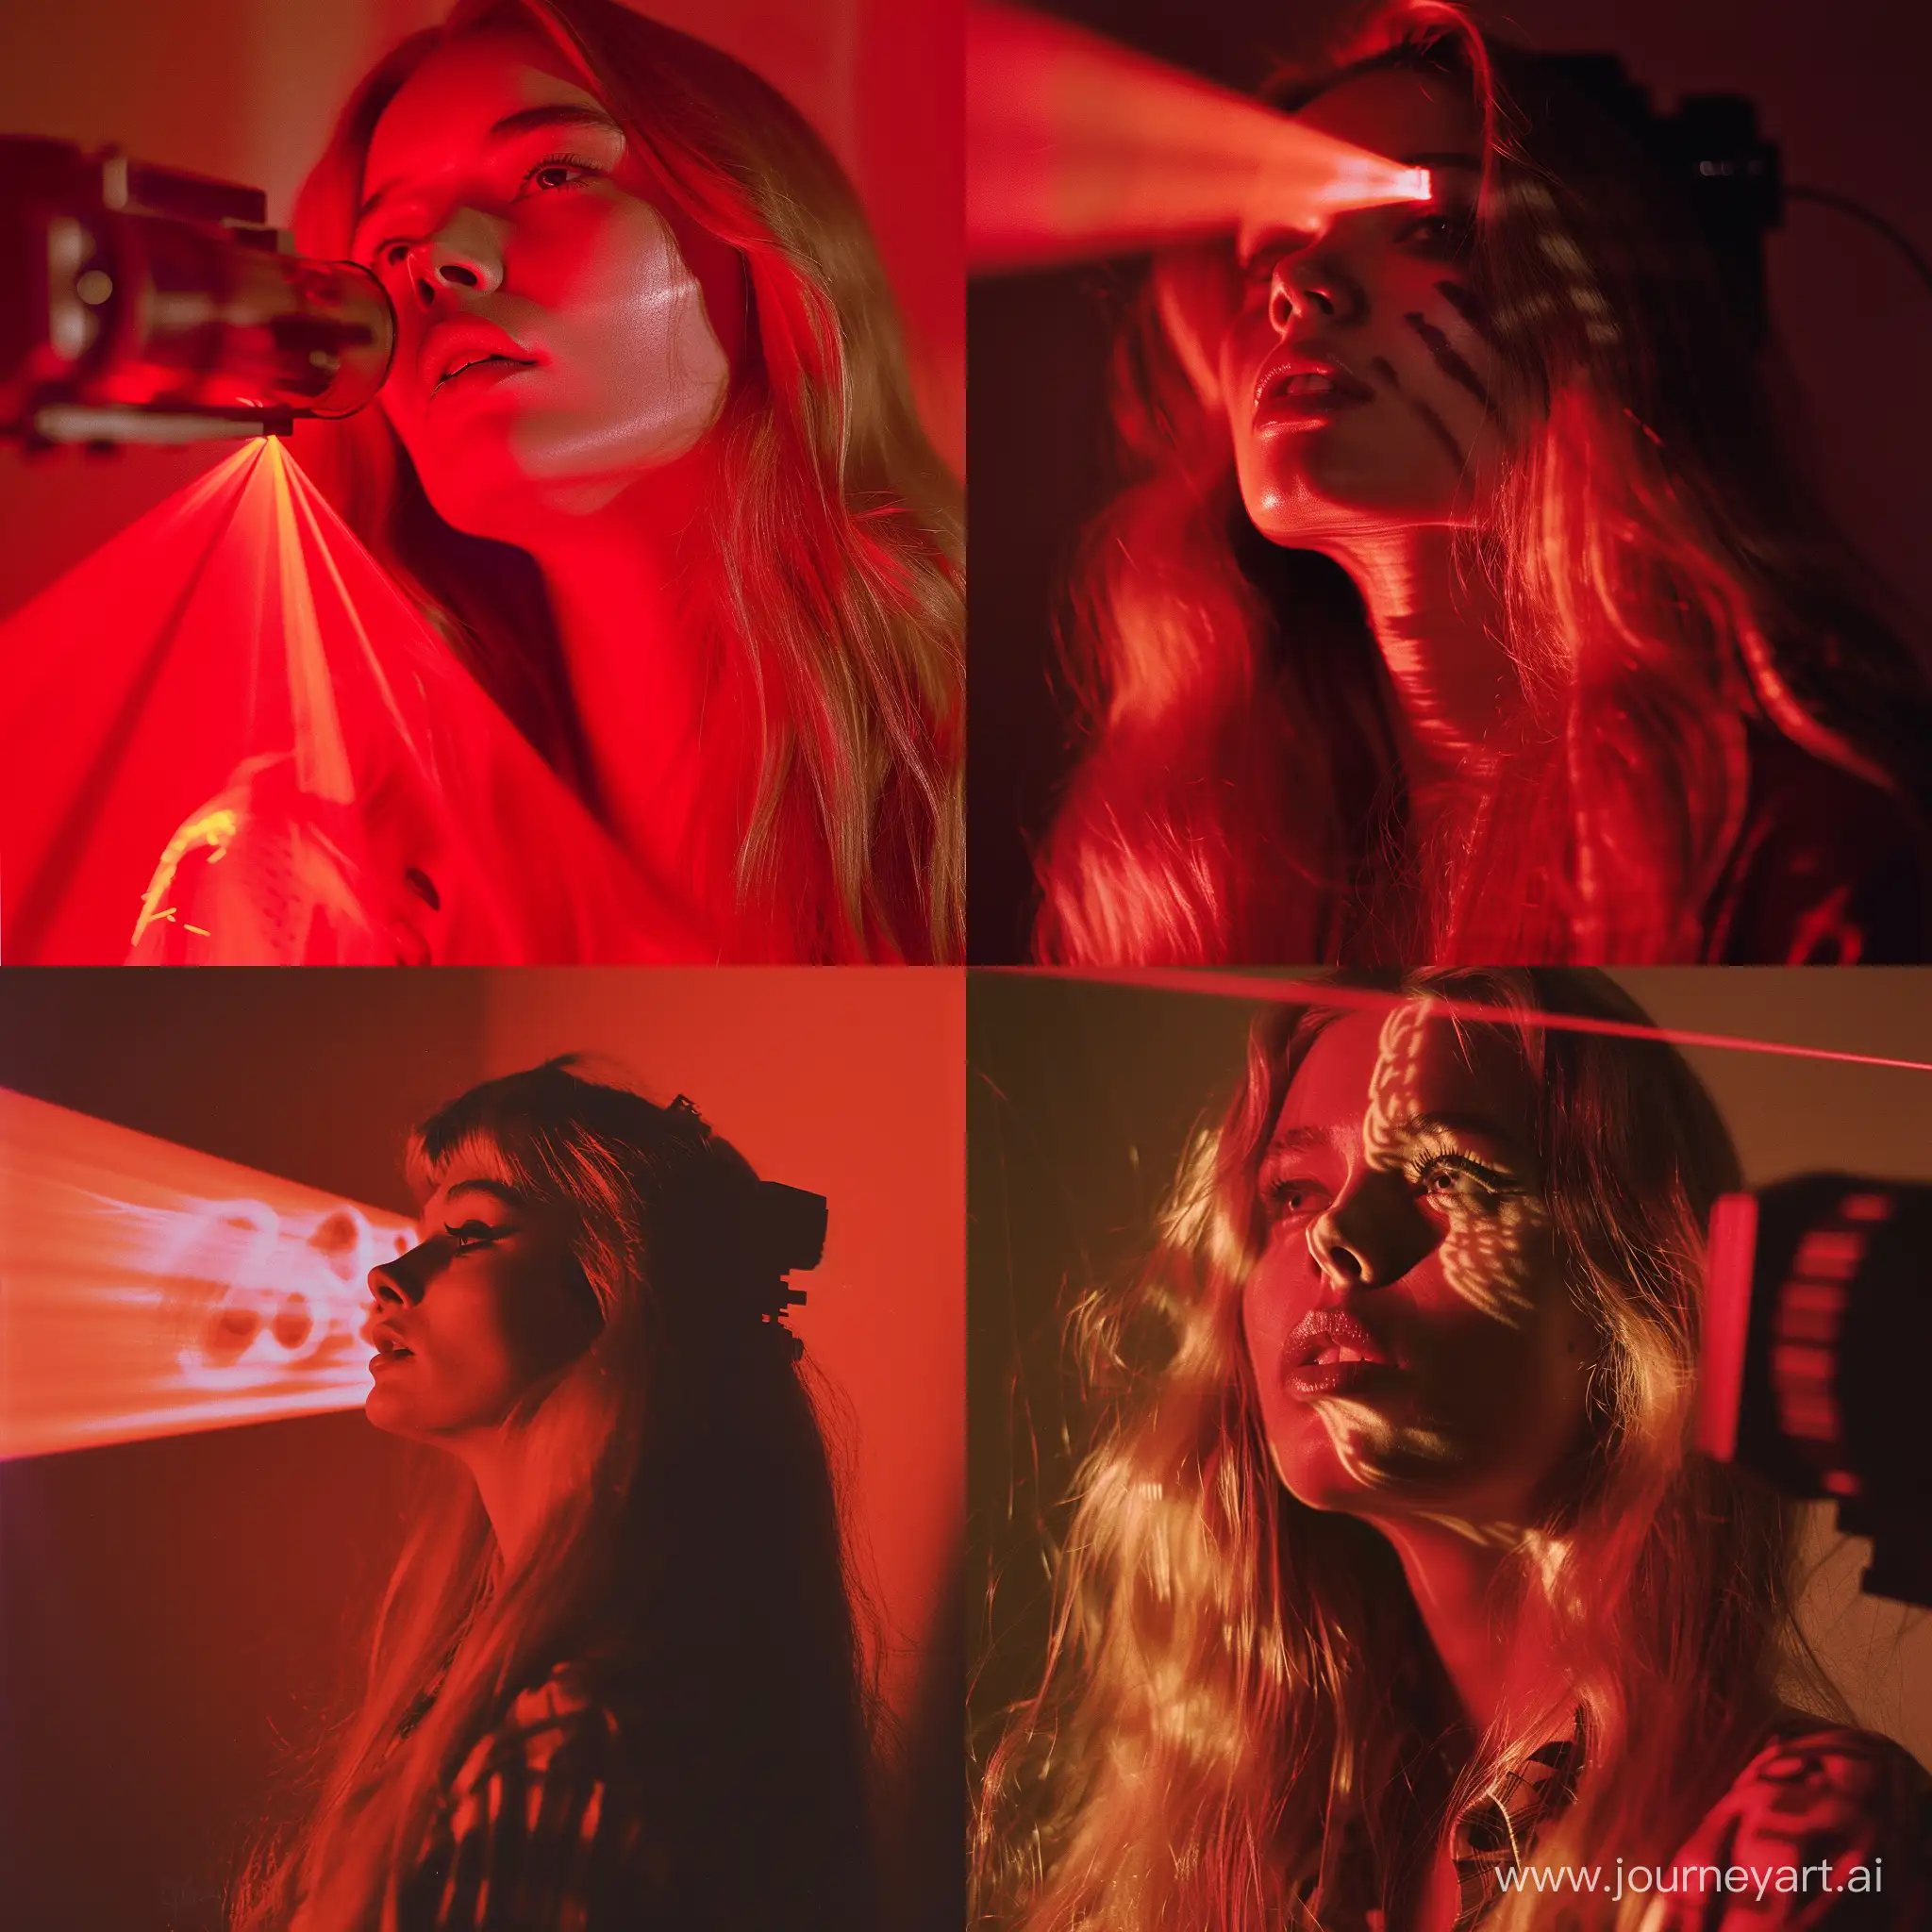 Audrey-Hepburn-Portraying-Madonna-with-Long-Blonde-Hair-Under-Neon-Red-Projector-Light